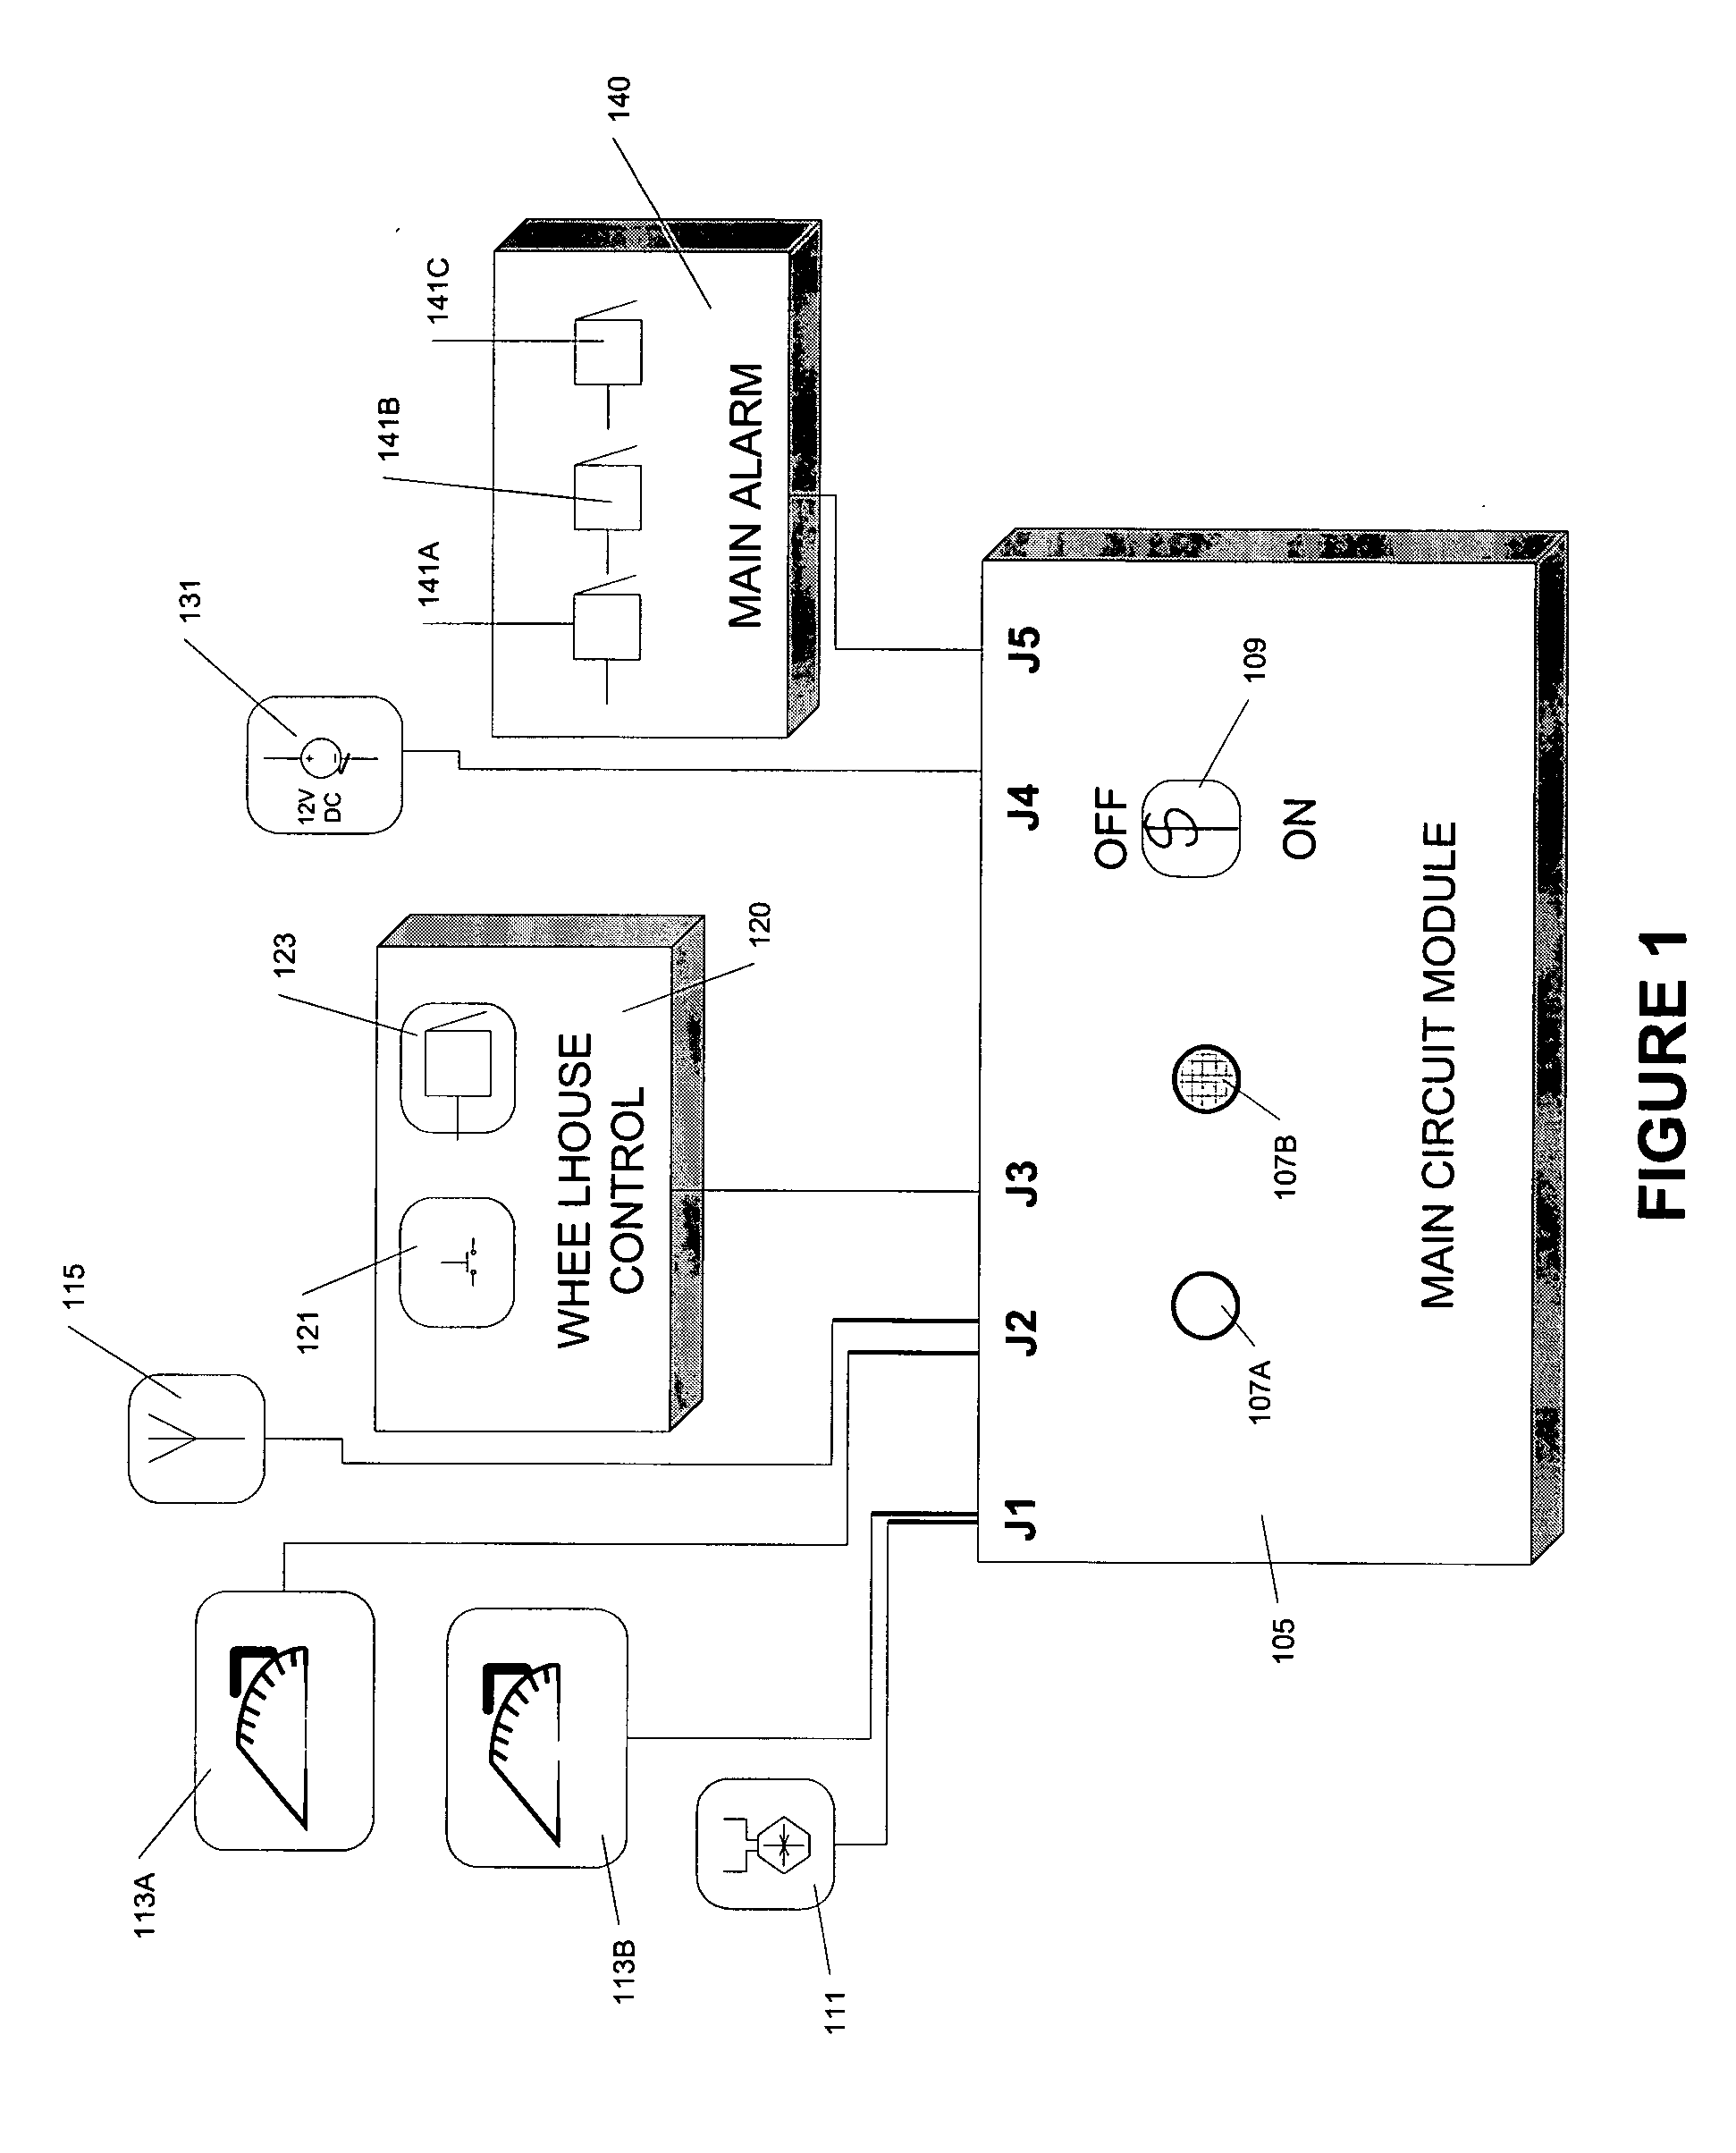 Collision avoidance method and system